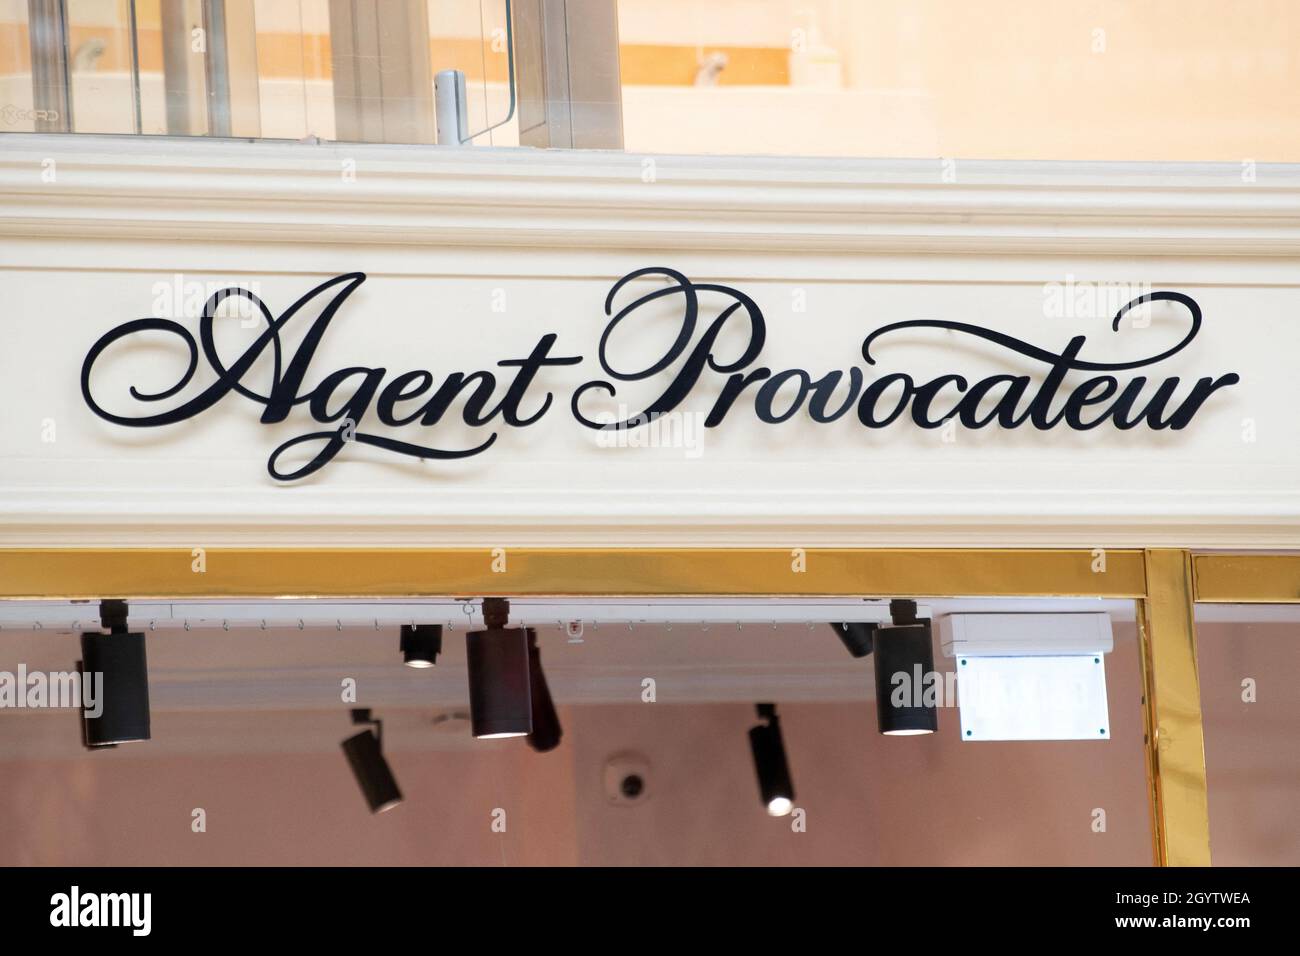 Agent Provocateur Shop High Resolution Stock Photography and Images - Alamy